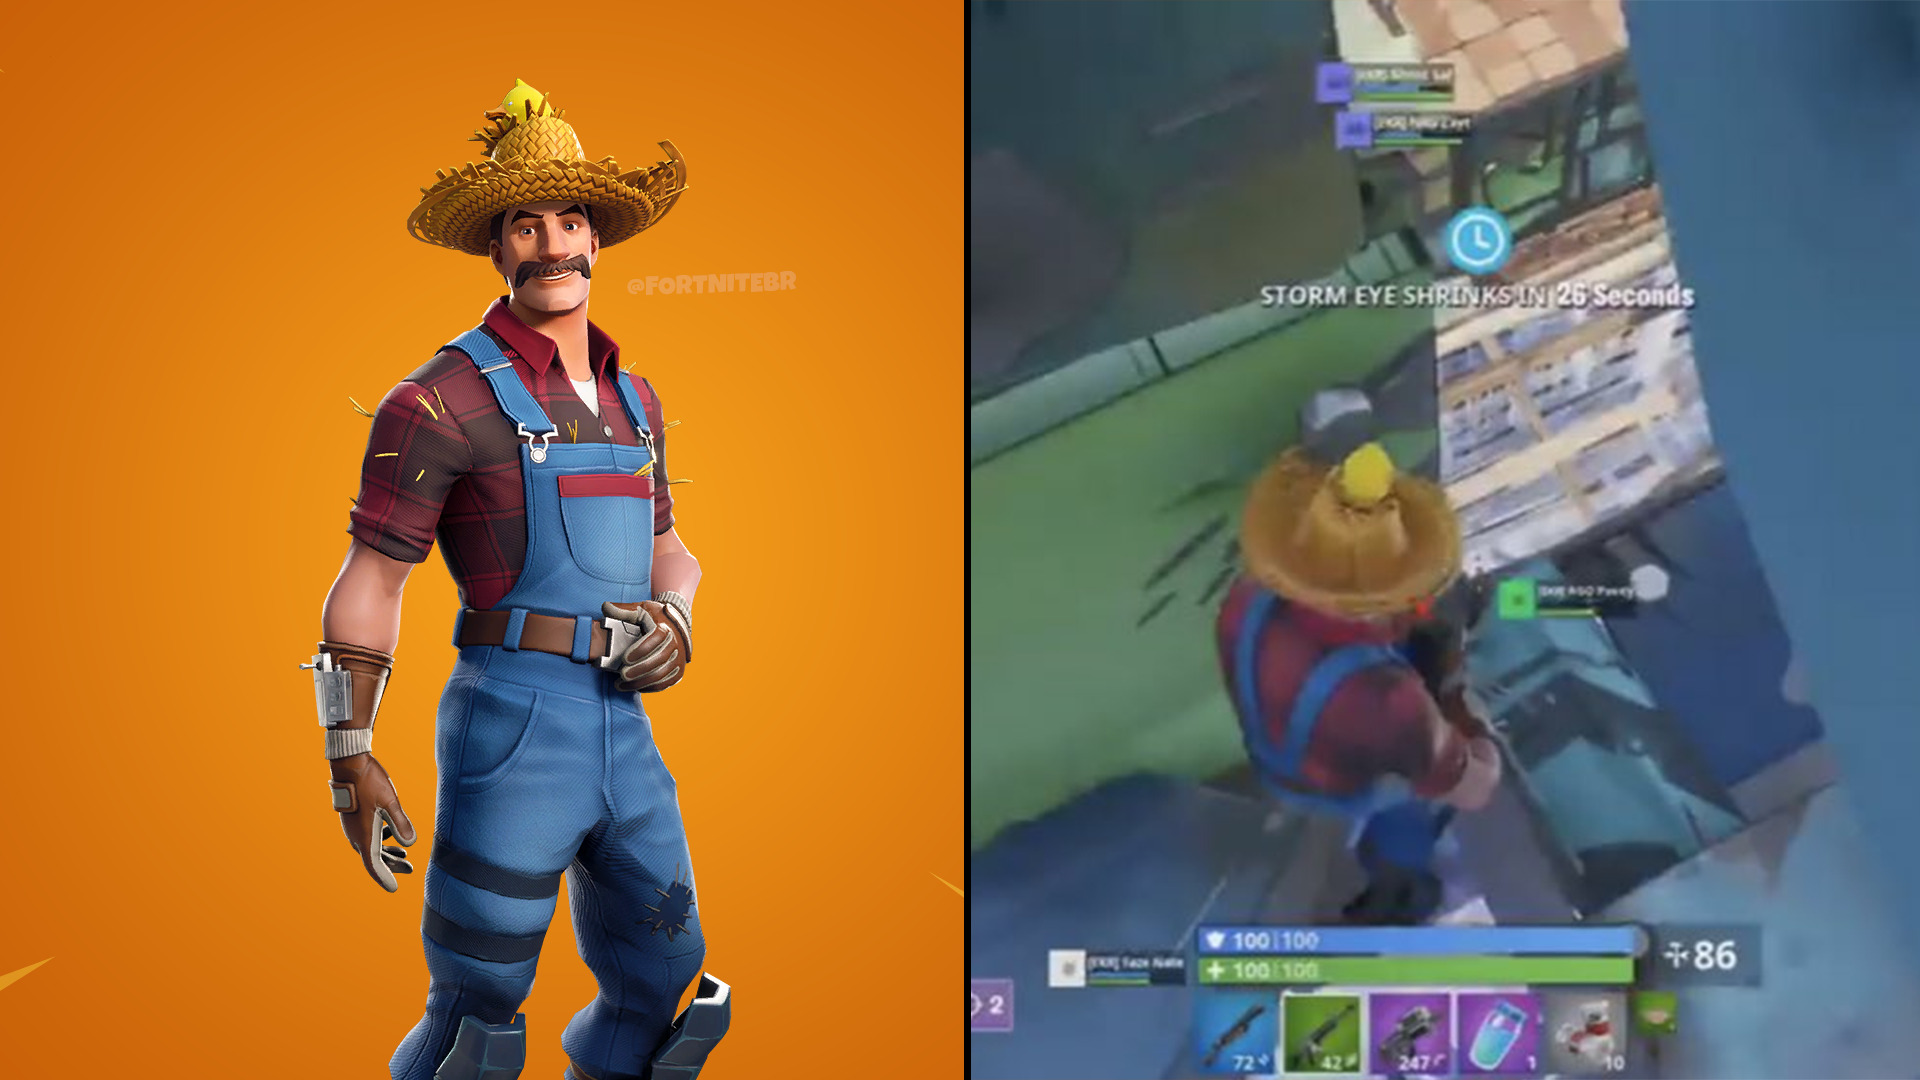 Many Unreleased Fortnite Cosmetics Are Being Used At The Esl